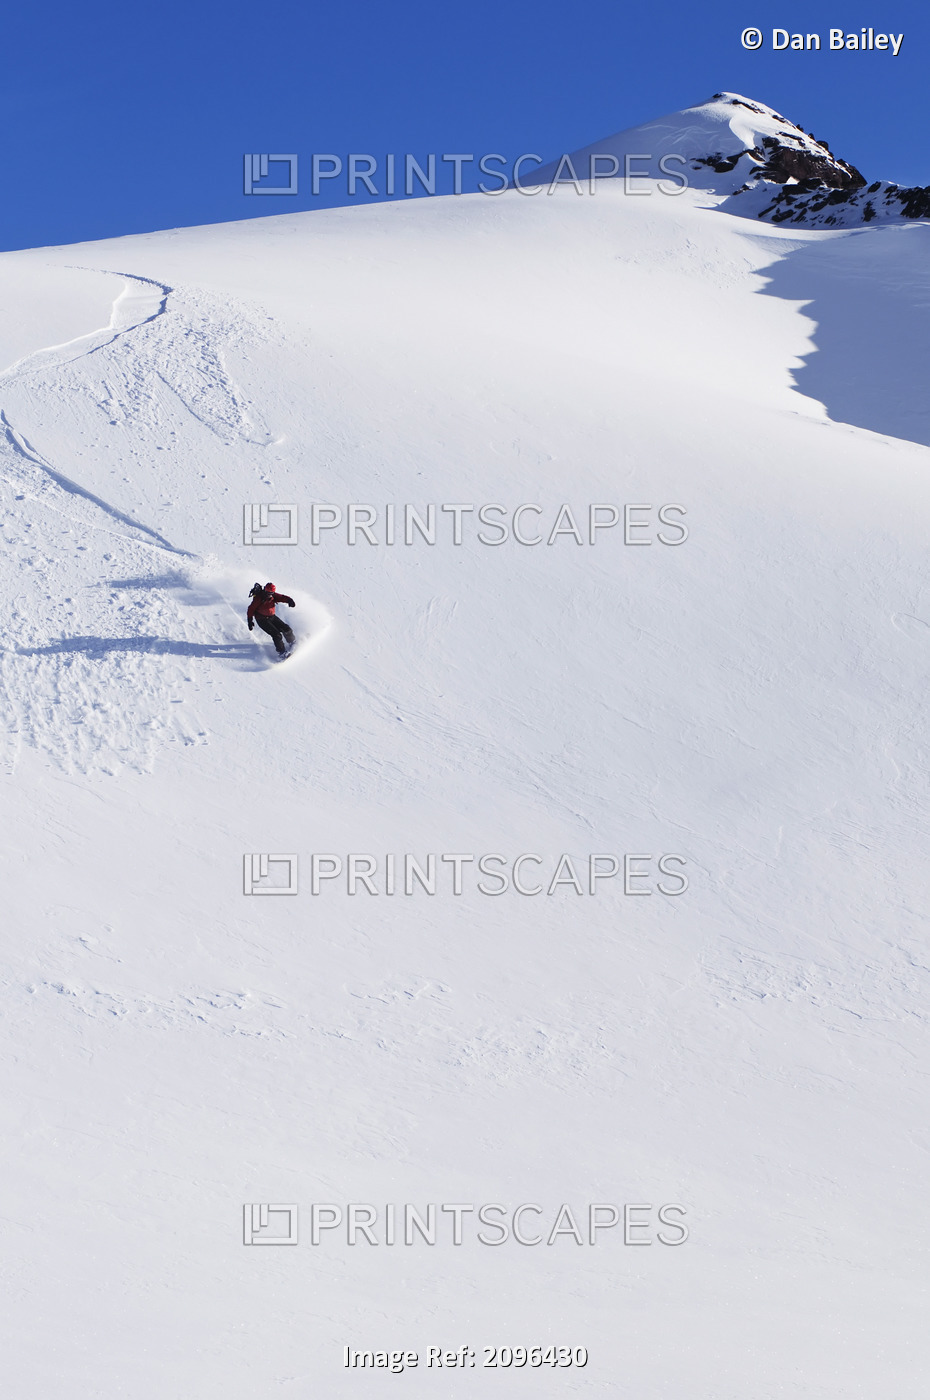 Backcountry Snowboarder Carving Turns Down A Steep Mountain Face, Eagle ...